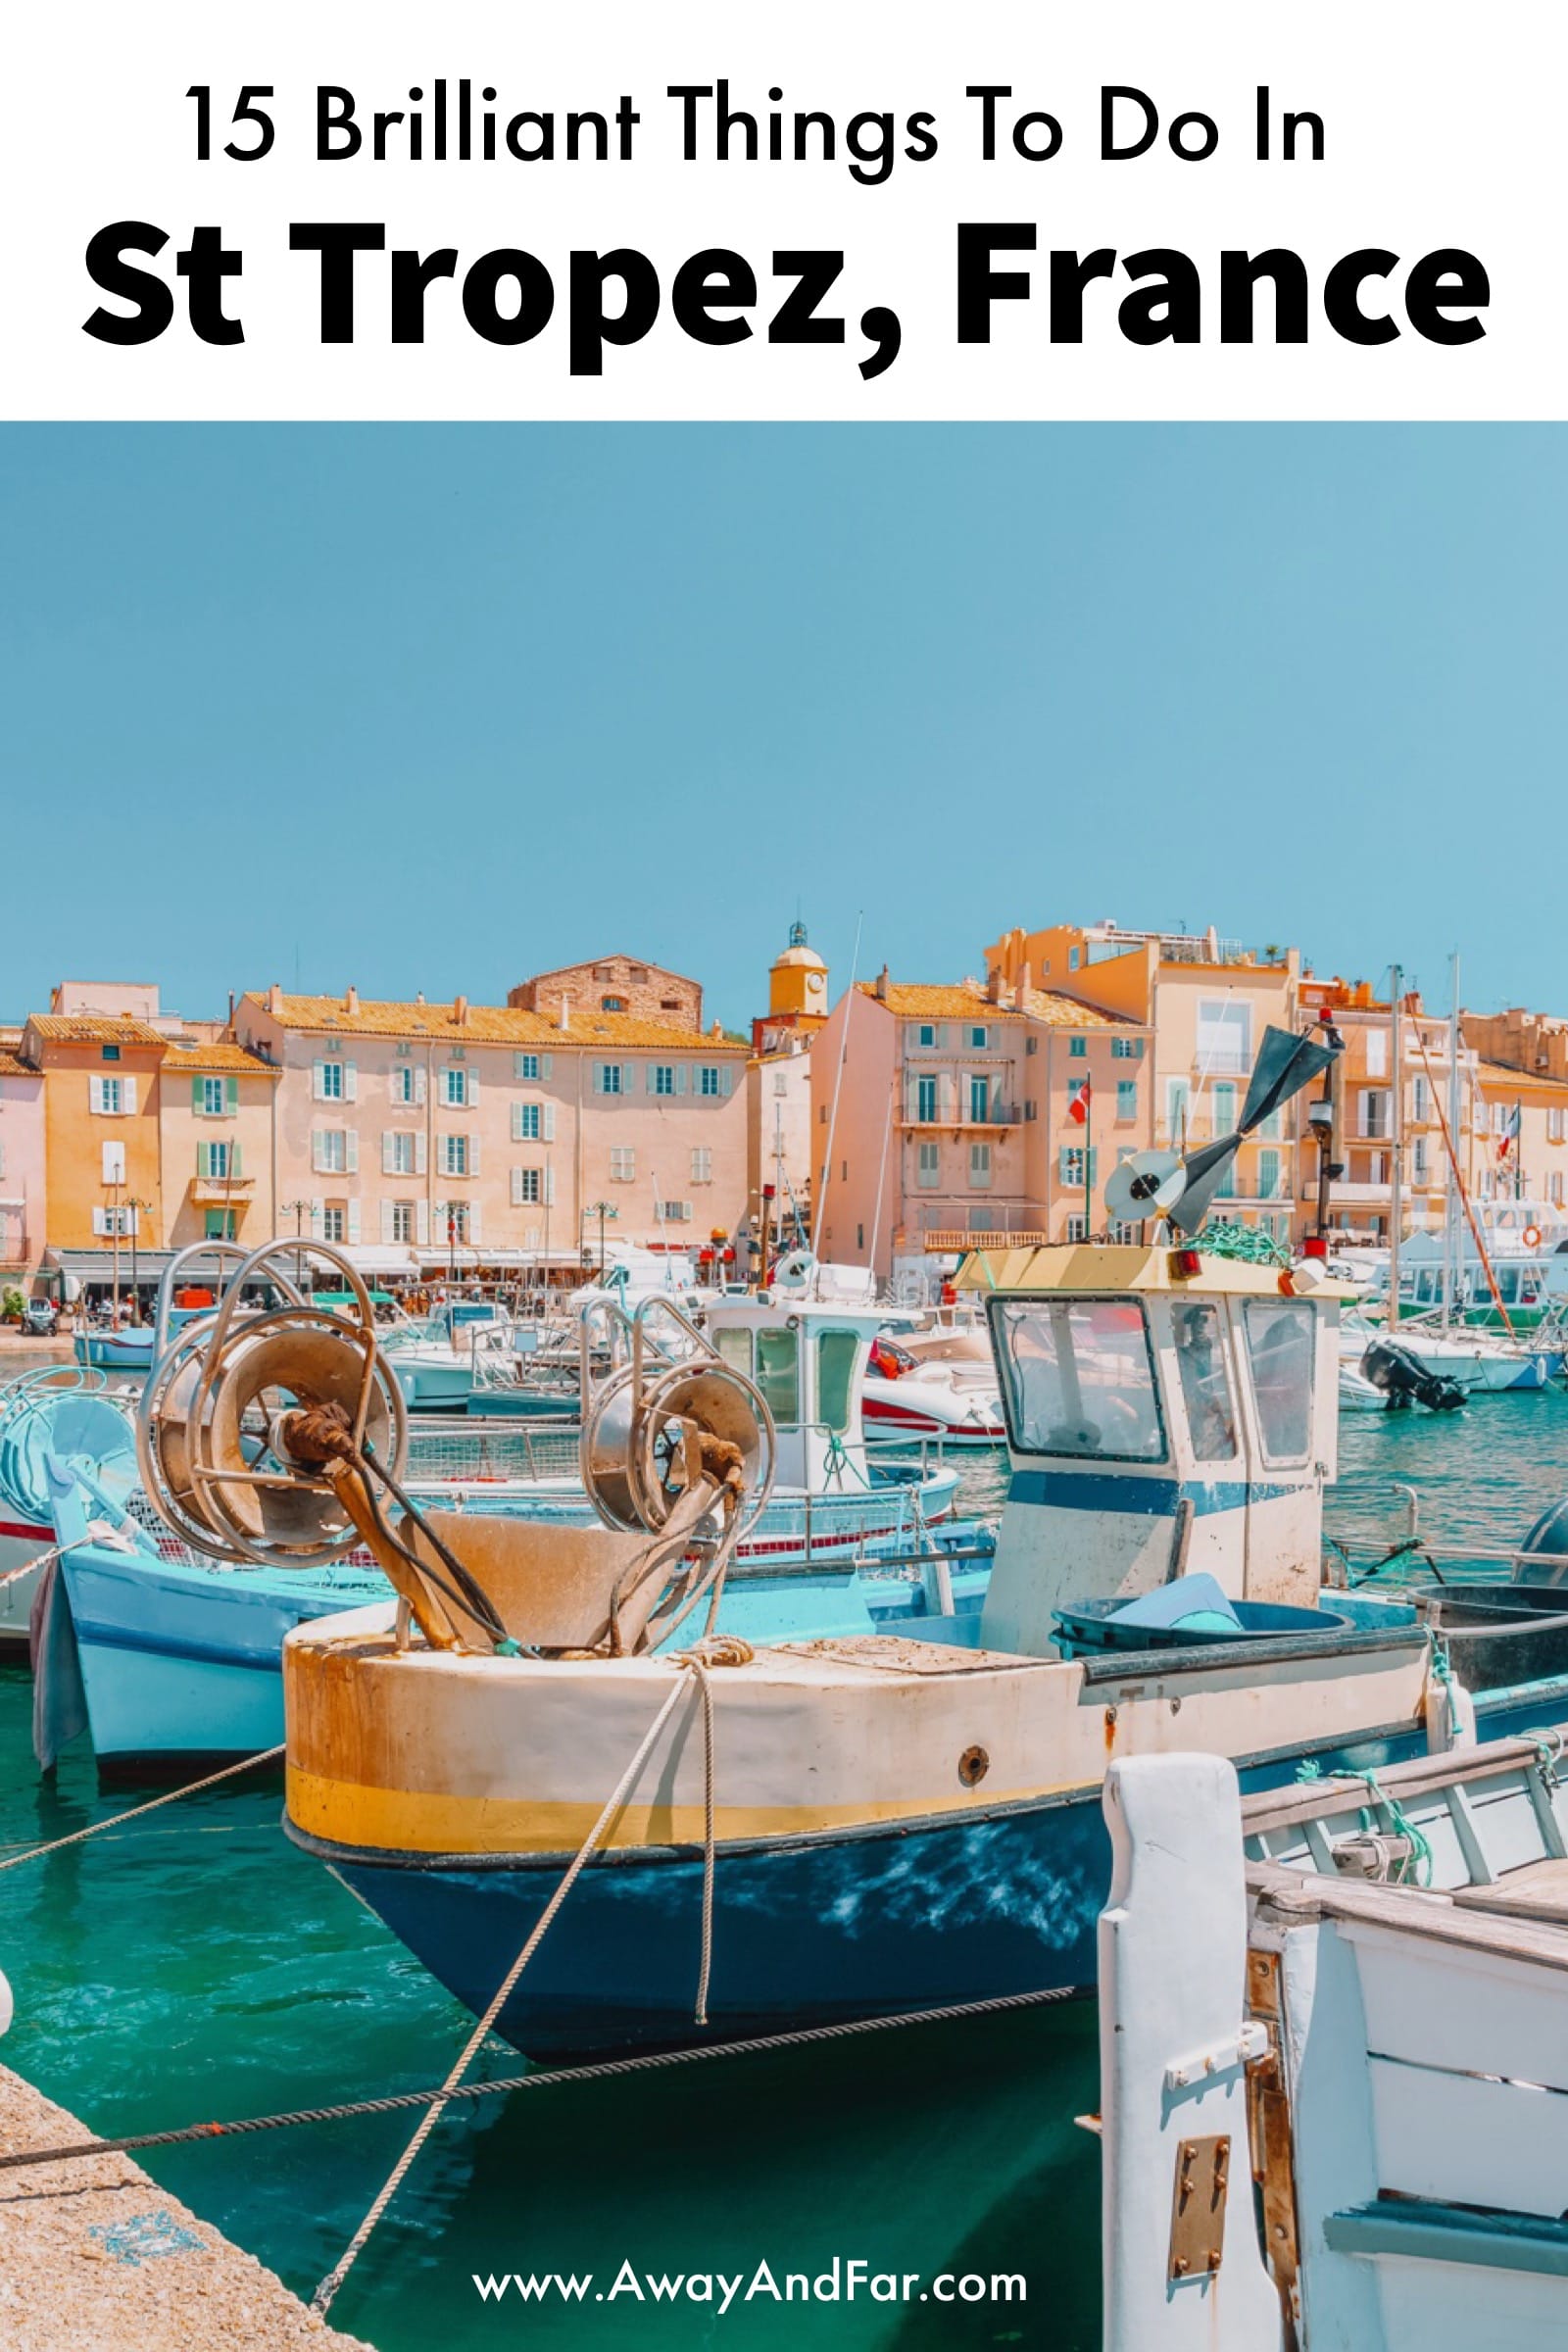 15 Best Things To Do In Saint-Tropez, France (1)